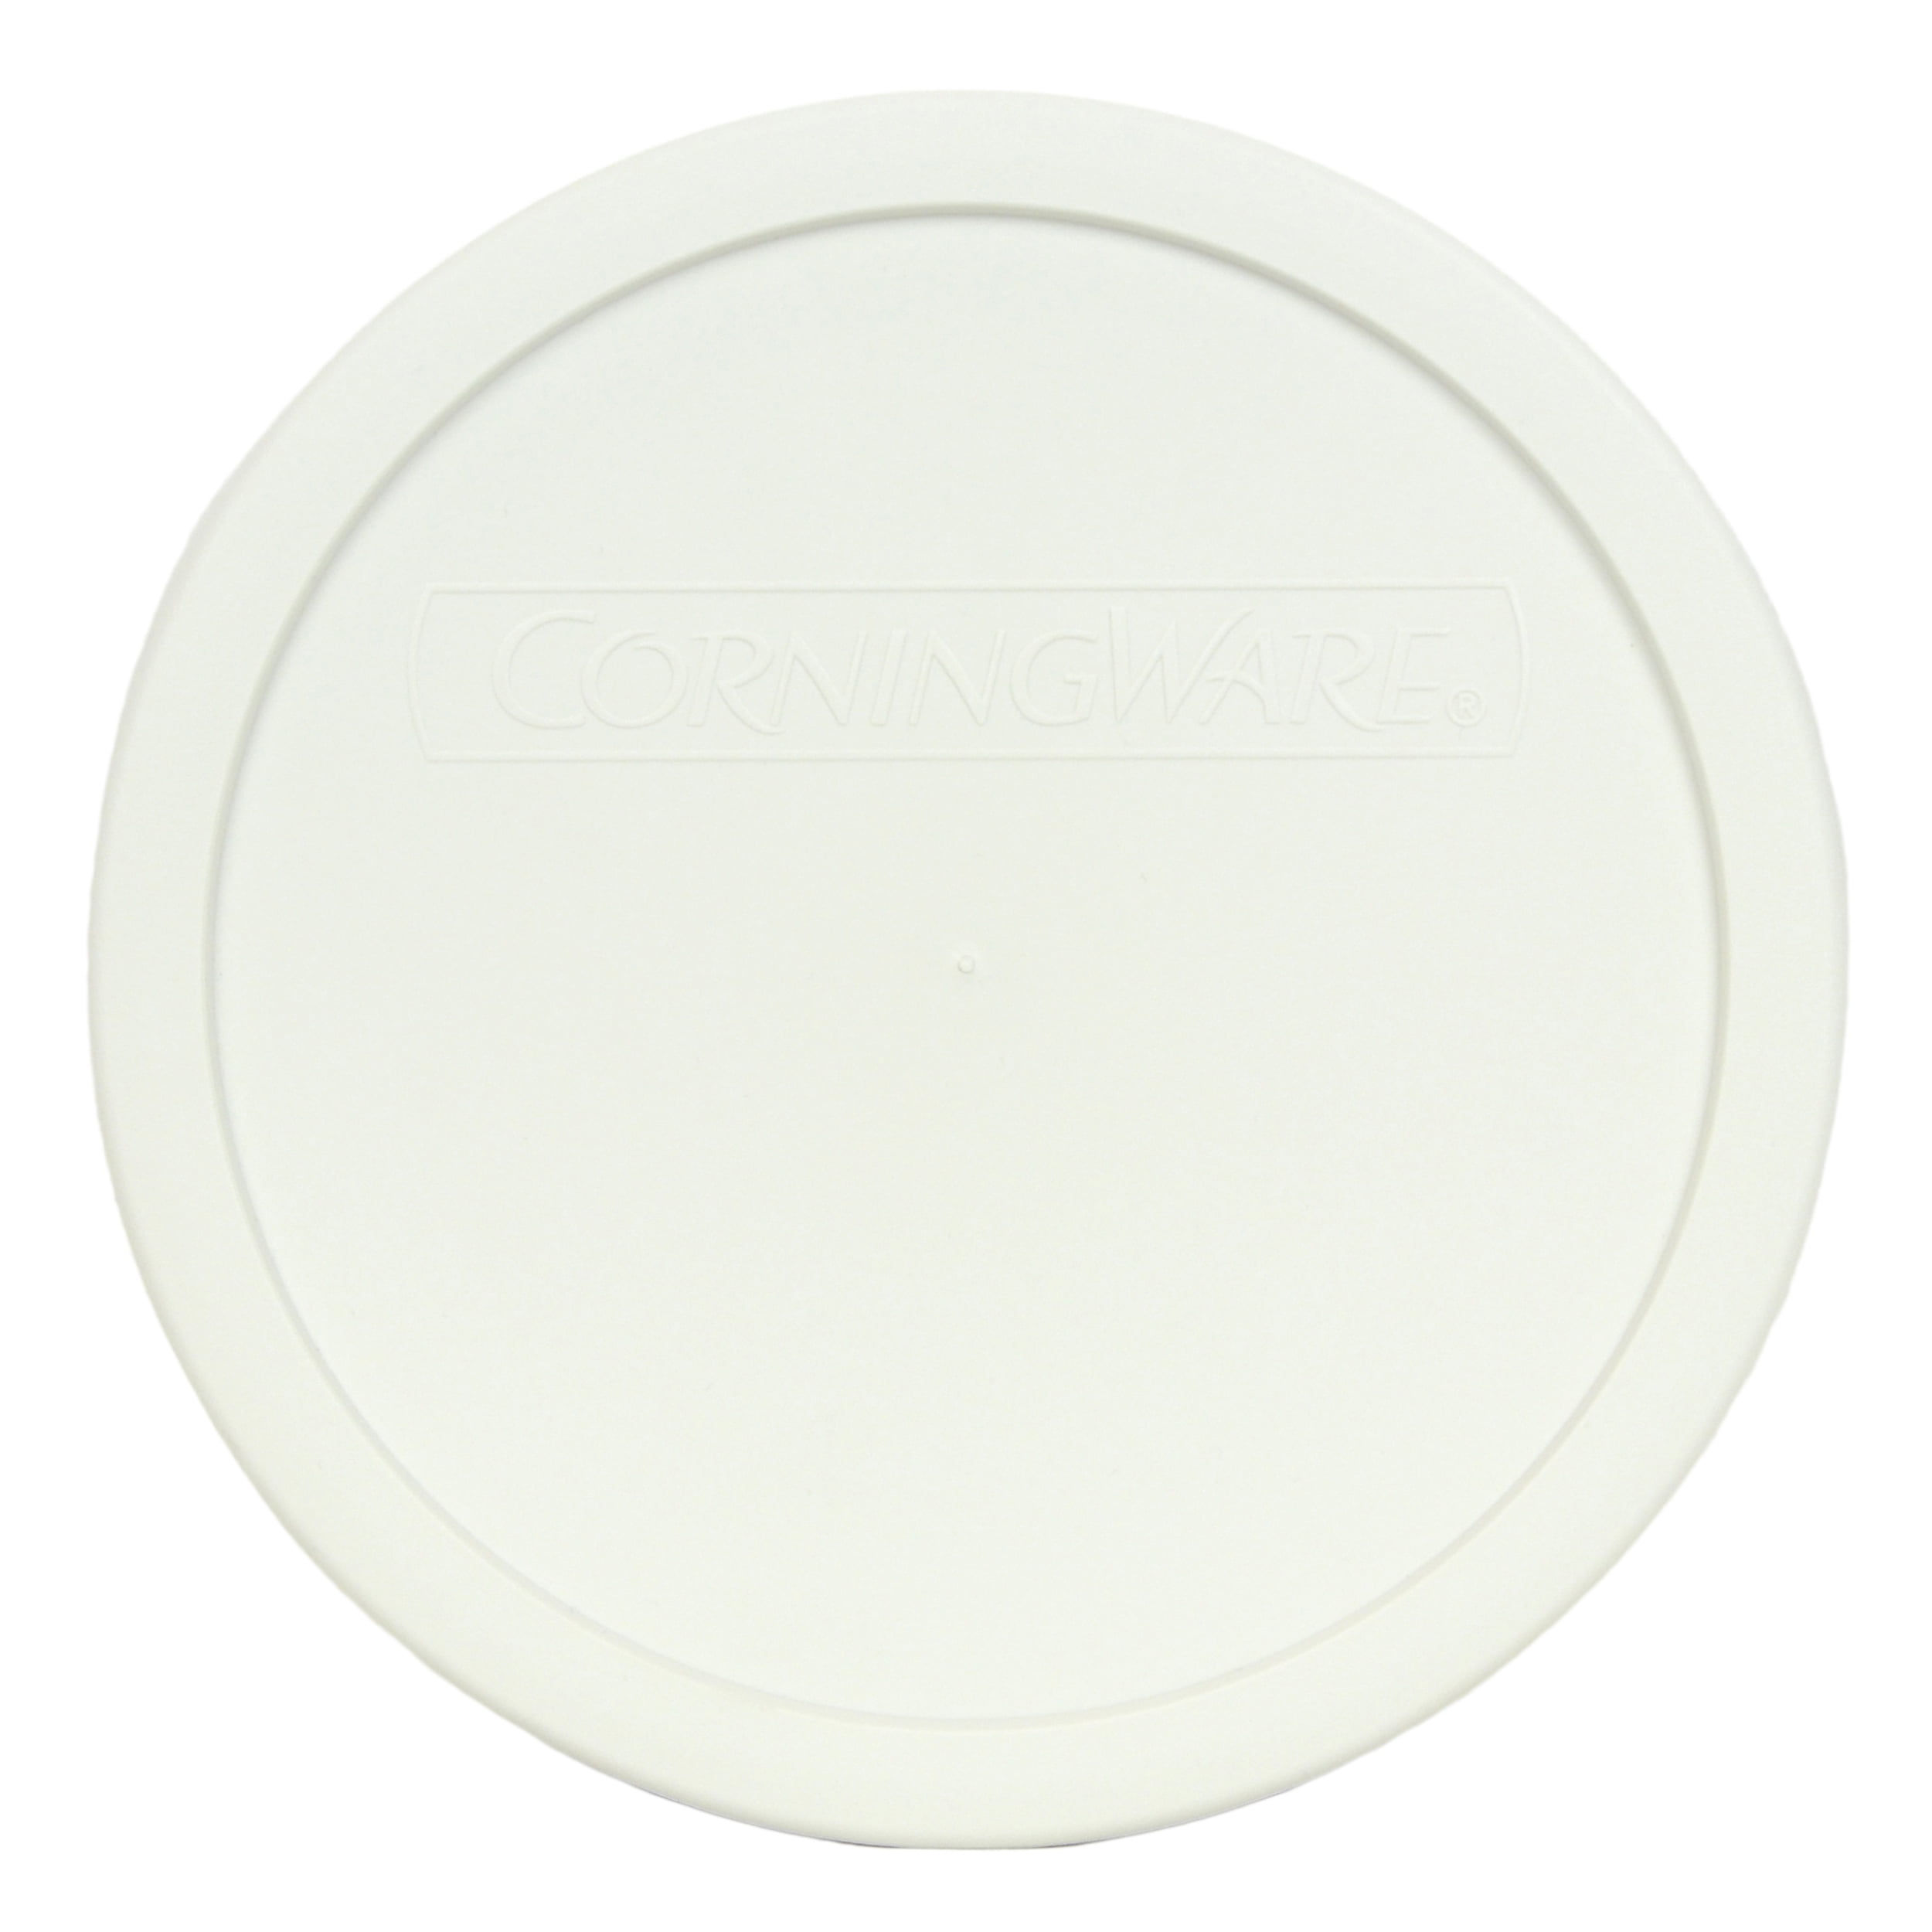 CorningWare Corning Ware Plastic Replacement Lid F-12-PC for 1.5 Qt French White Dish White 